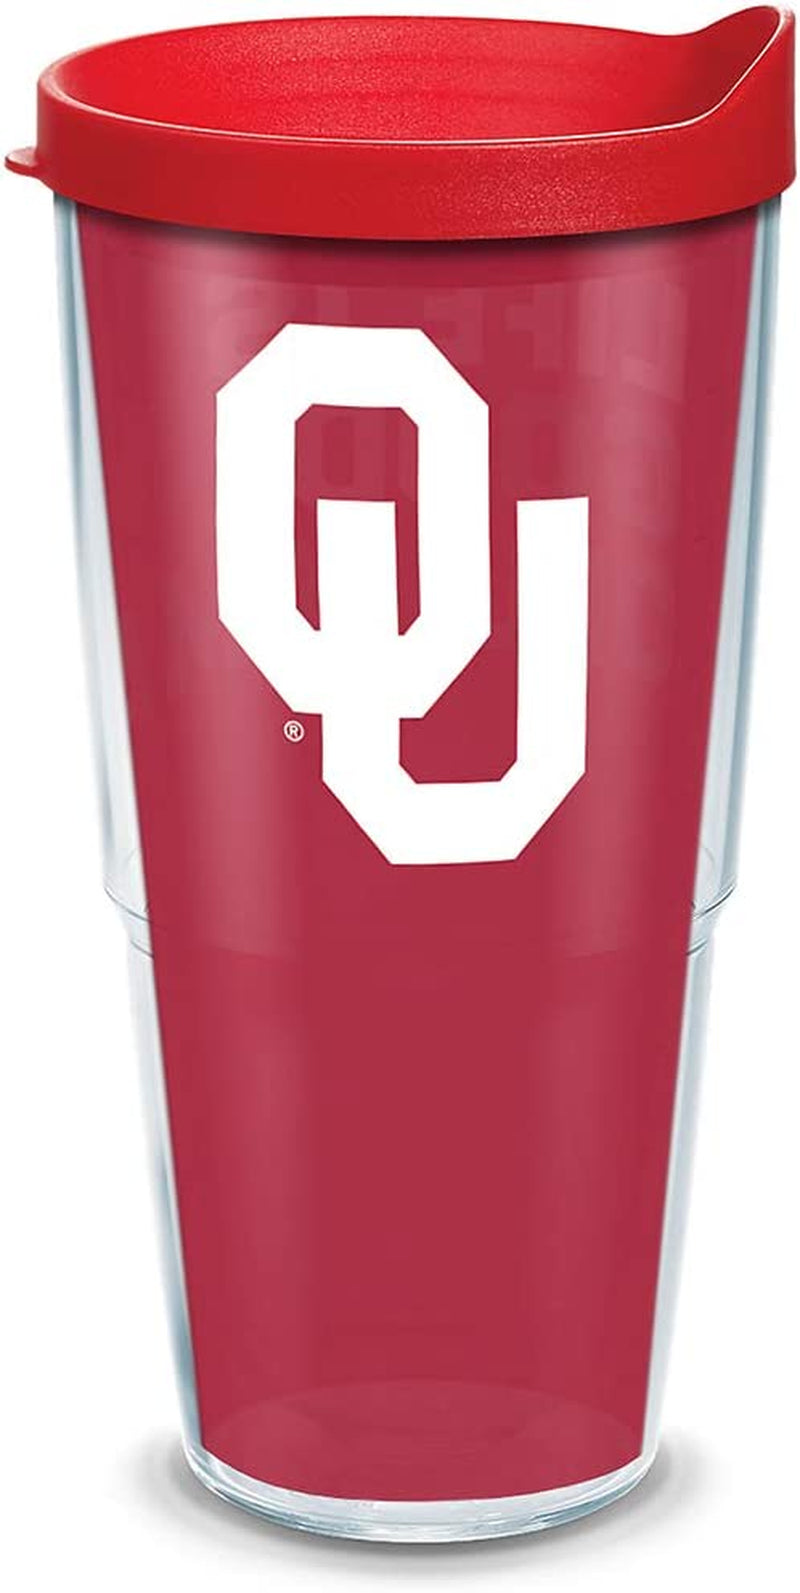 Tervis Made in USA Double Walled University of Oklahoma Sooners Insulated Tumbler Cup Keeps Drinks Cold & Hot, 24Oz, All Over Home & Garden > Kitchen & Dining > Tableware > Drinkware Tervis Life is Good 24oz 